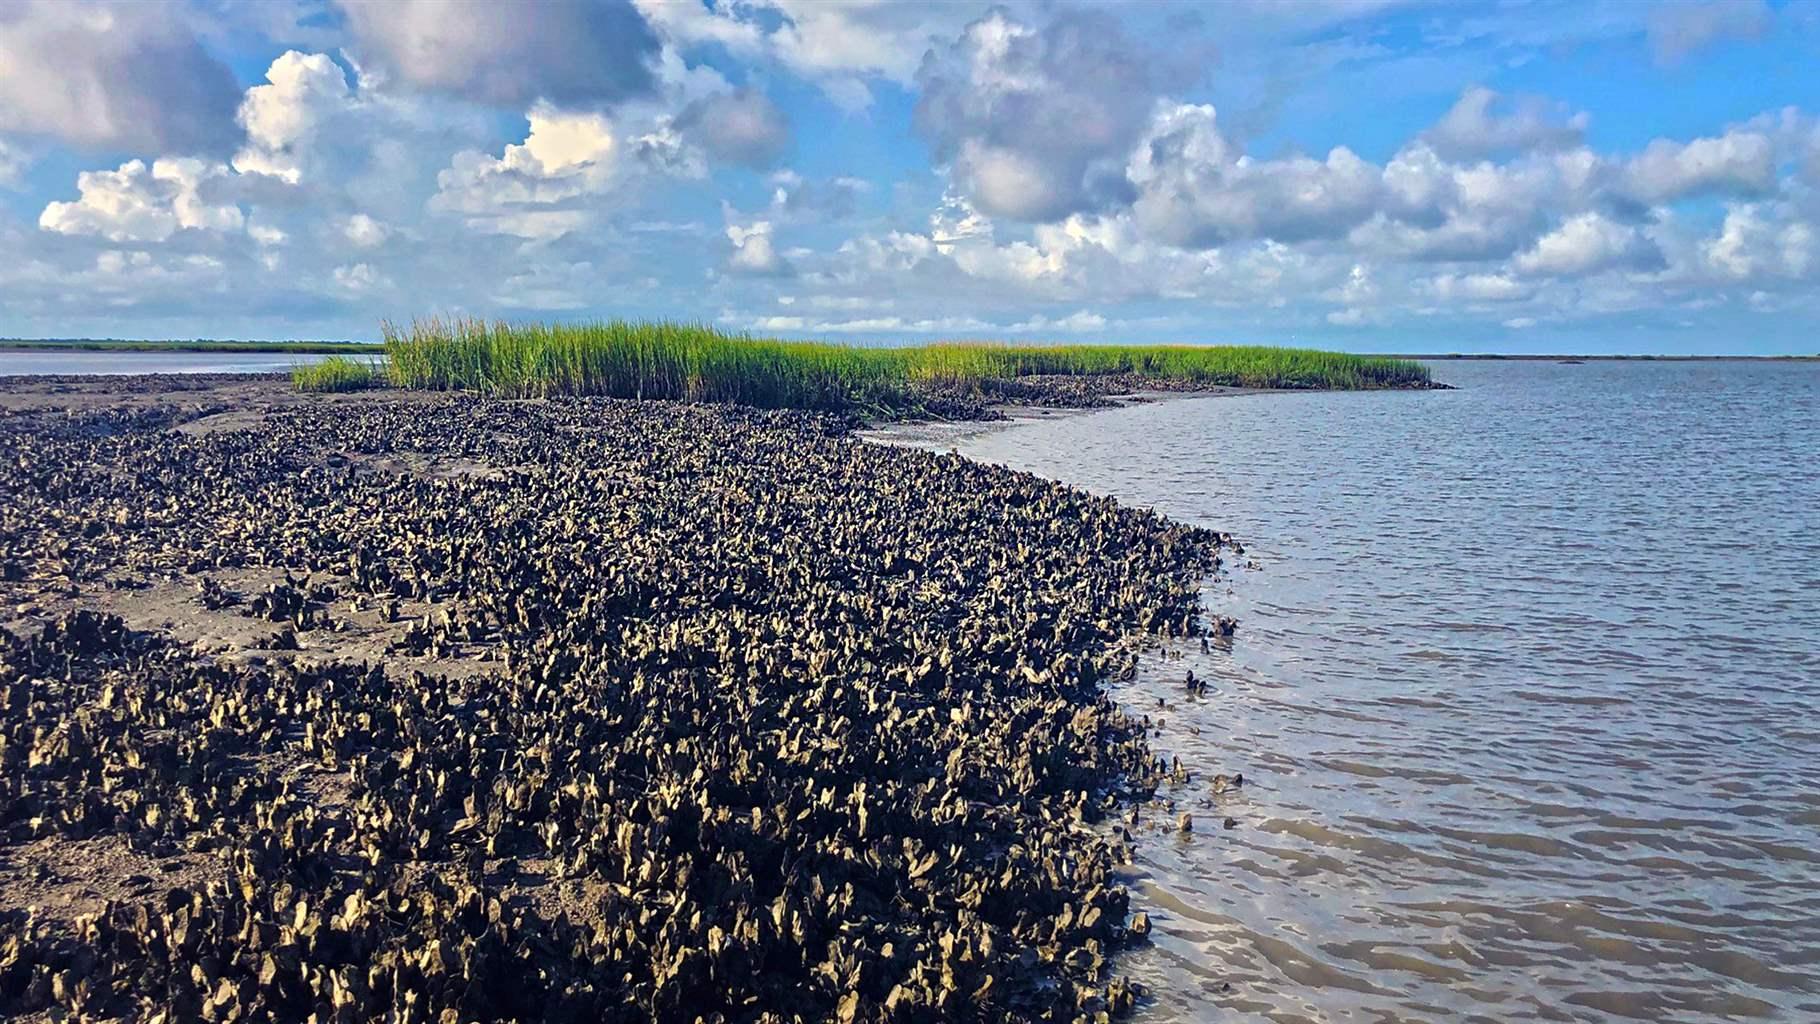 Atlantic and Gulf Coast Oyster Reefs Are at Historic Lows but Can Recover - The Pew Charitable Trusts